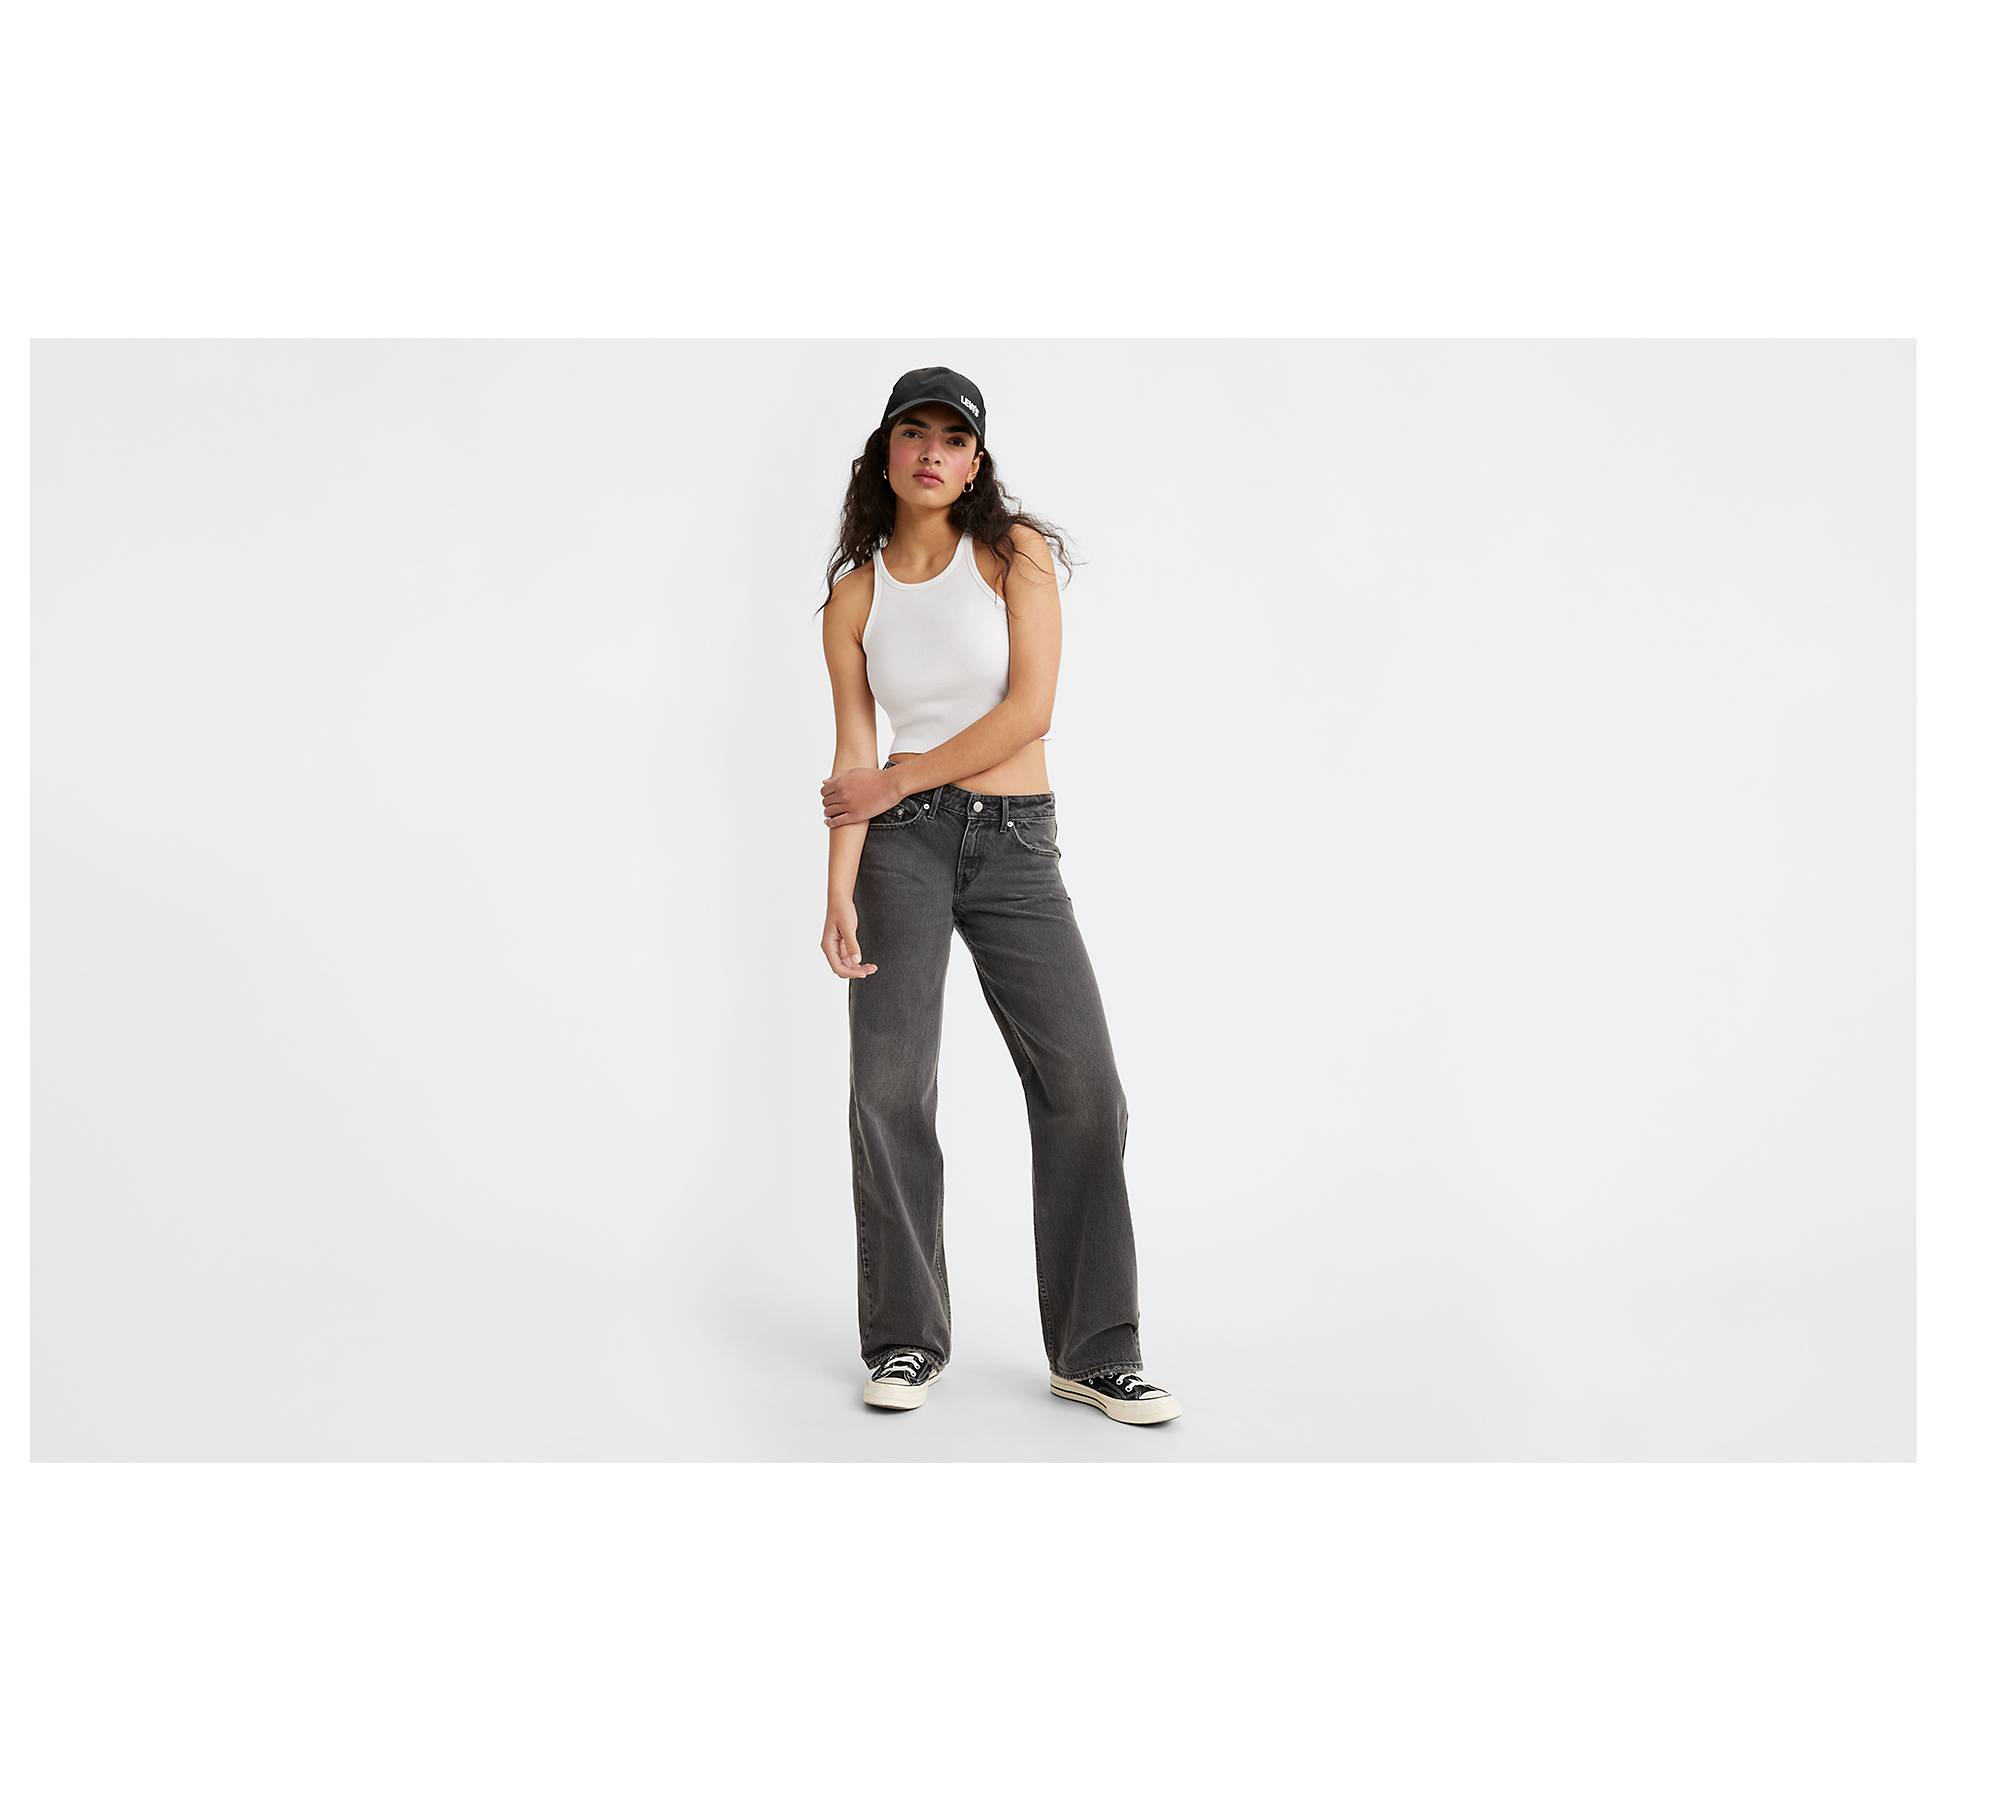 Women's Petite Jeans  Baggy, Straight, High-Waisted, Low-Rise